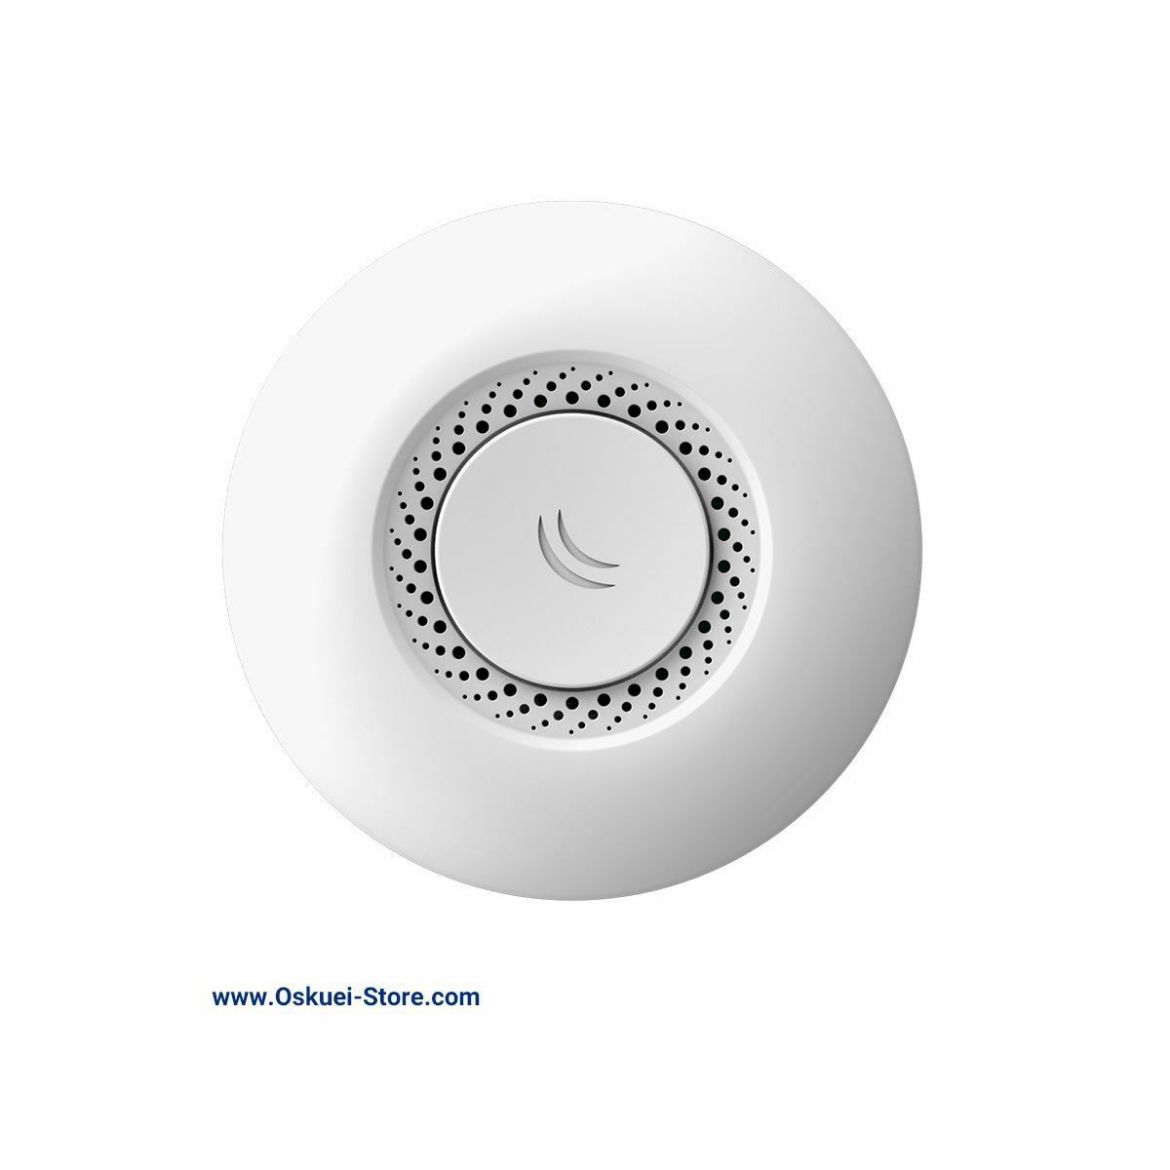 MikroTik RBcAP2nD In Ceiling Network Access Point Front